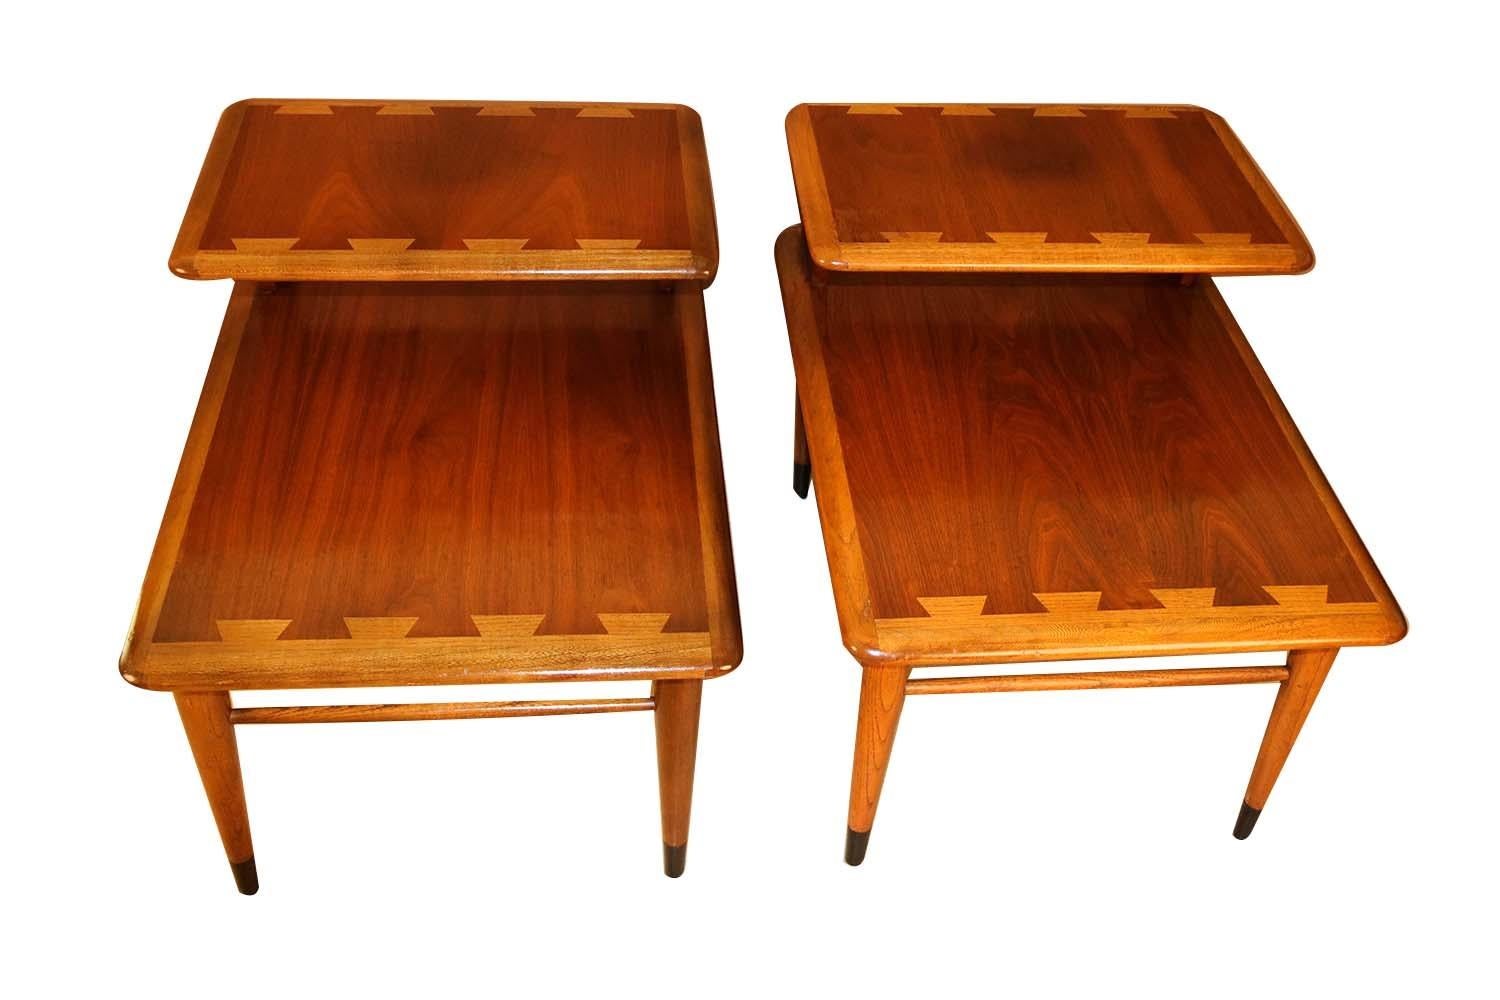 American Midcentury Lane Acclaim Dovetail Two-Tier End Tables Pair